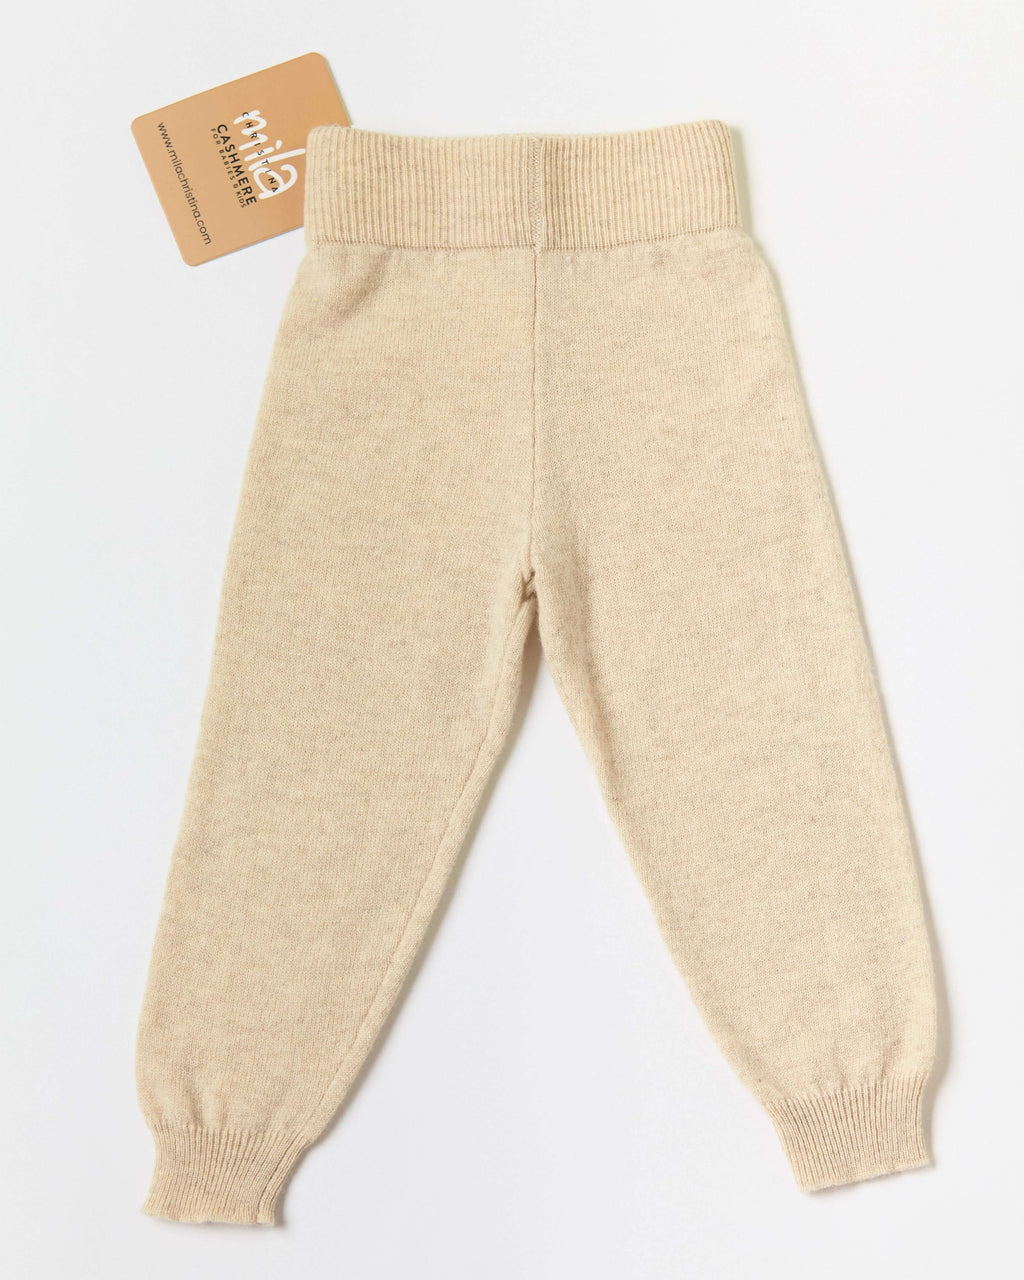 cashmere baby clothes